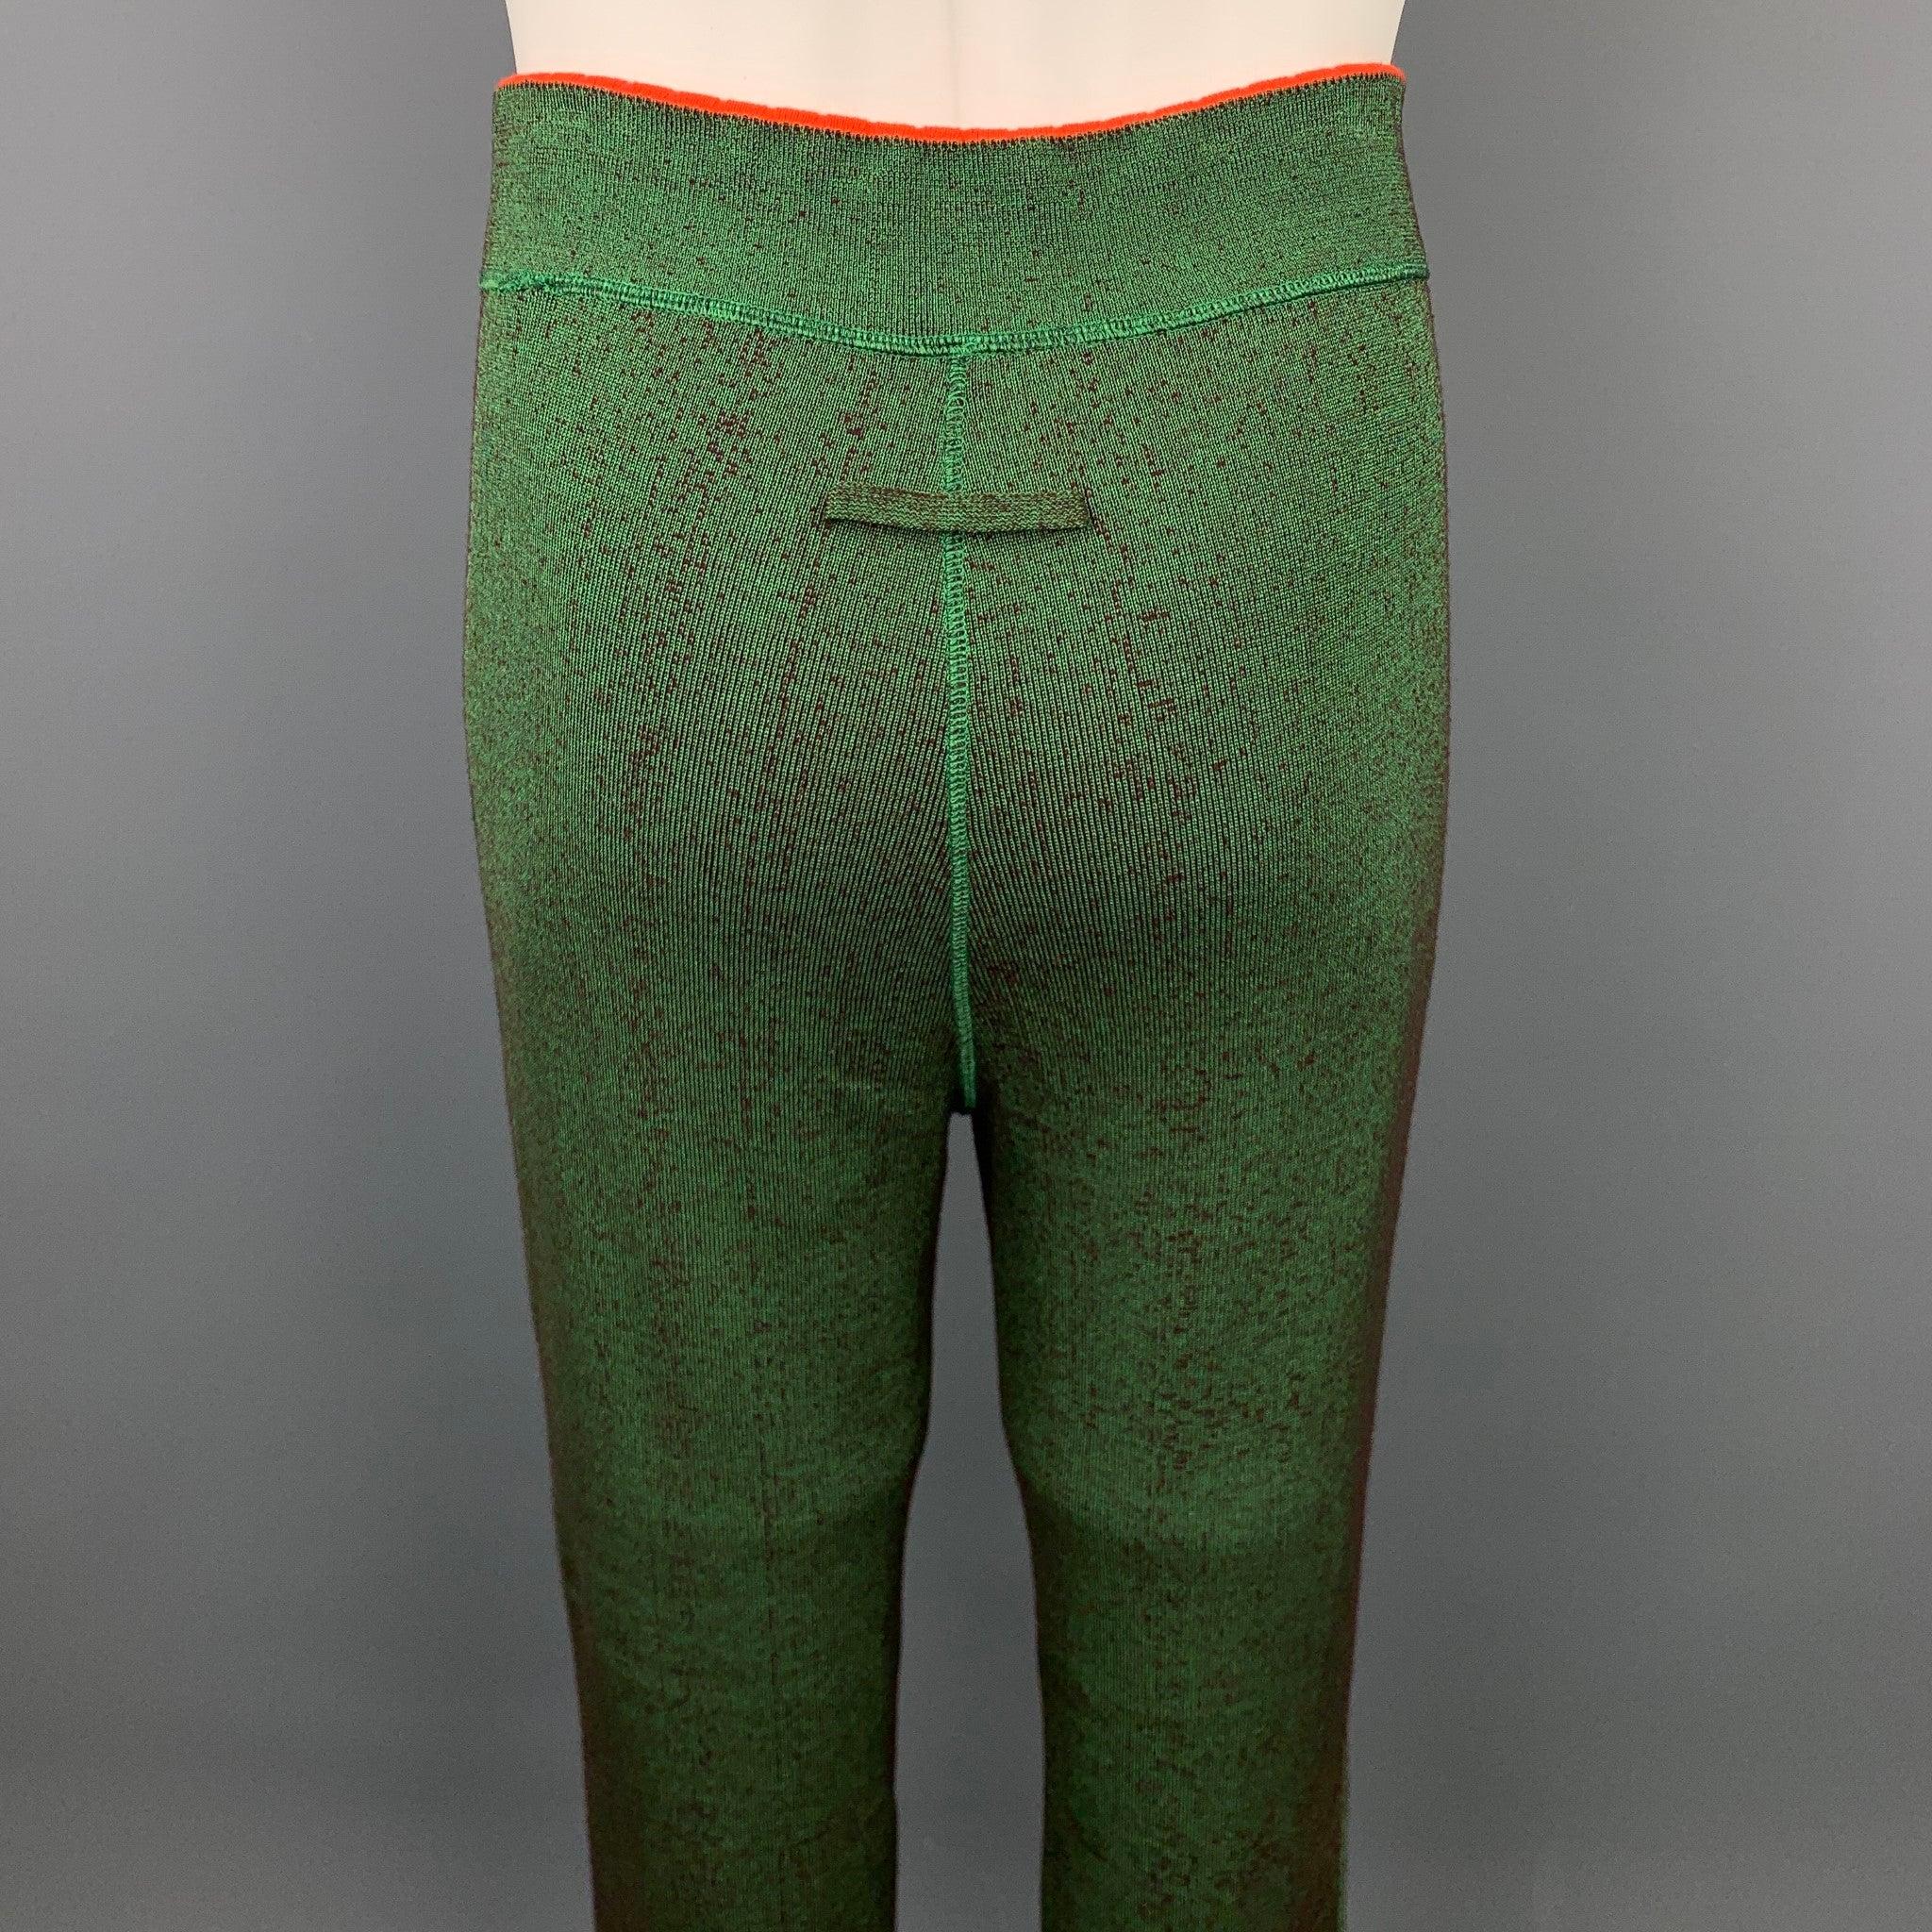 JEAN PAUL GAULTIER Size M Green Textured Wool Blend Reversible Sweatpants In Good Condition For Sale In San Francisco, CA